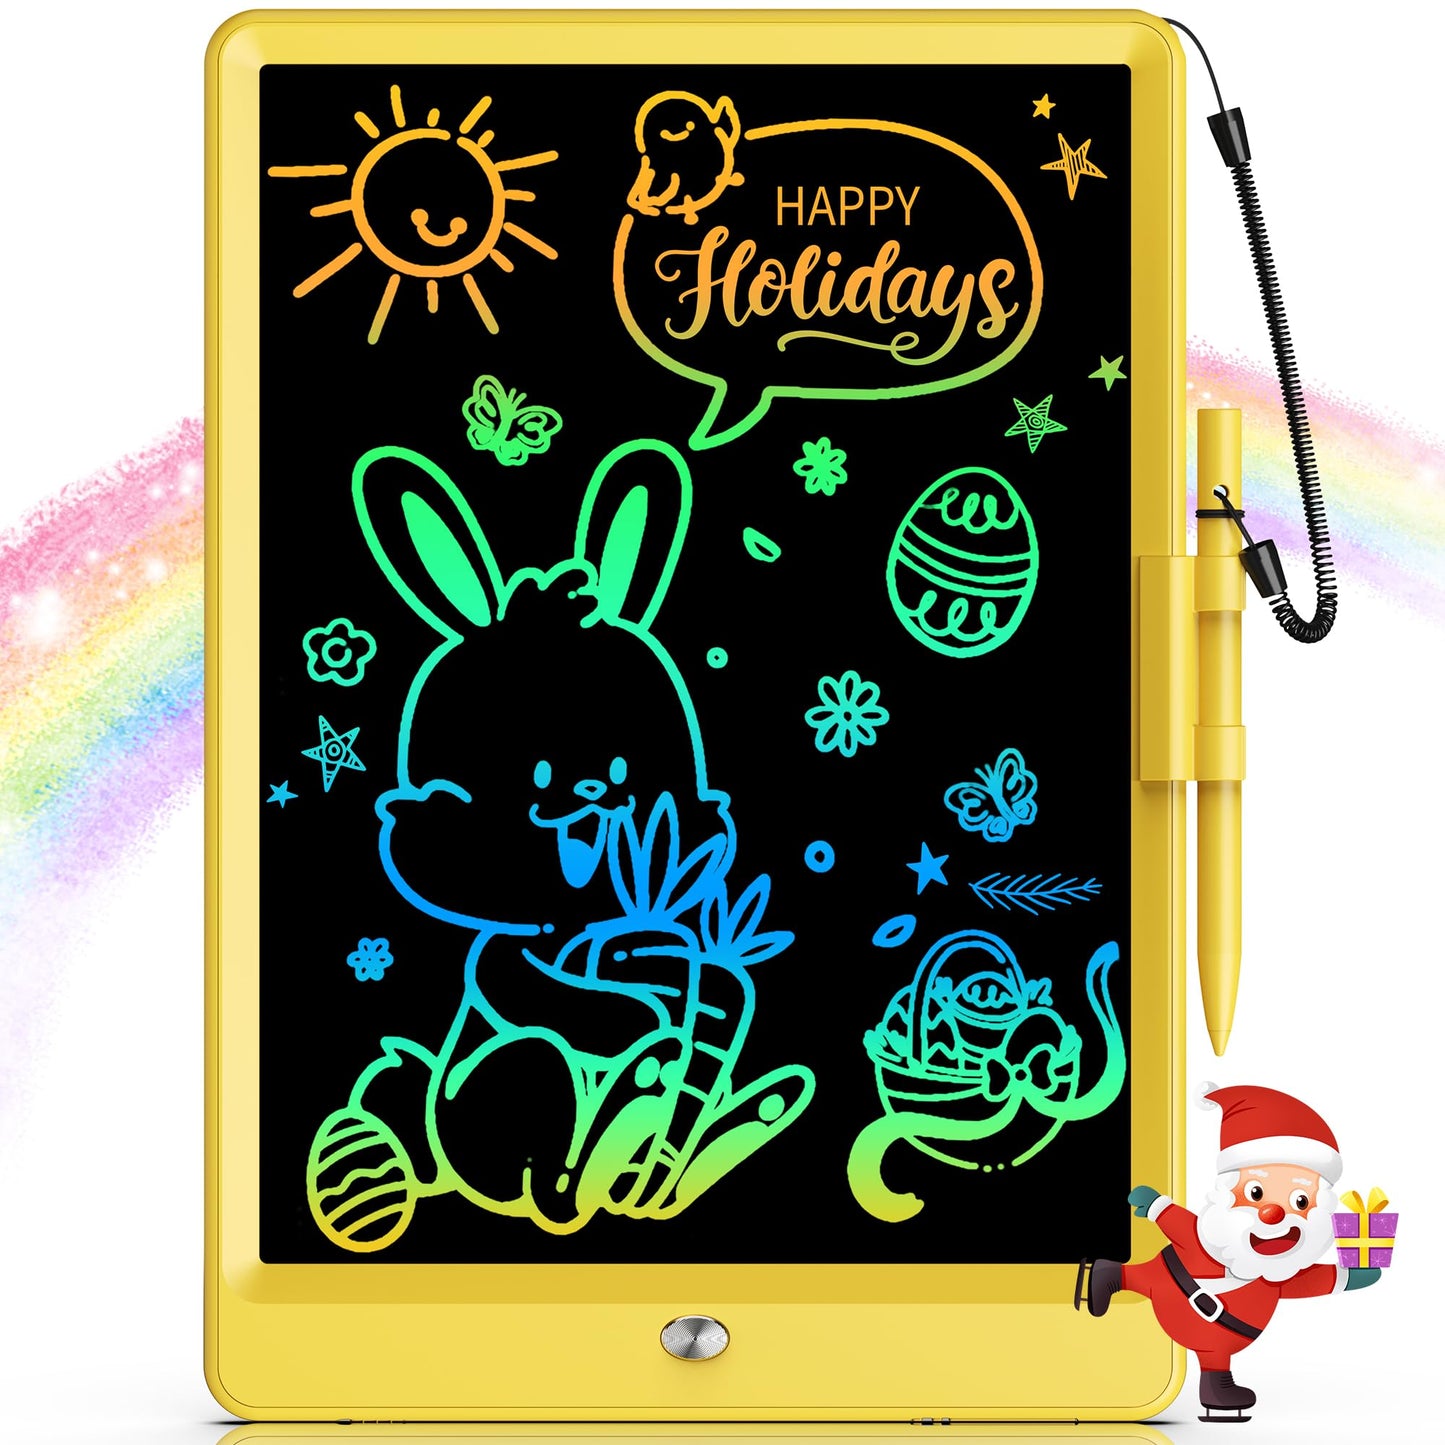 Bravokids Toys for 3-6 Years Old Girls Boys, LCD Writing Tablet 10 Inch Doodle Board, Electronic Drawing Pads, Educational Birthday Gift for 3 4 5 6 7 8 Years Old Kids Toddler (Blue)